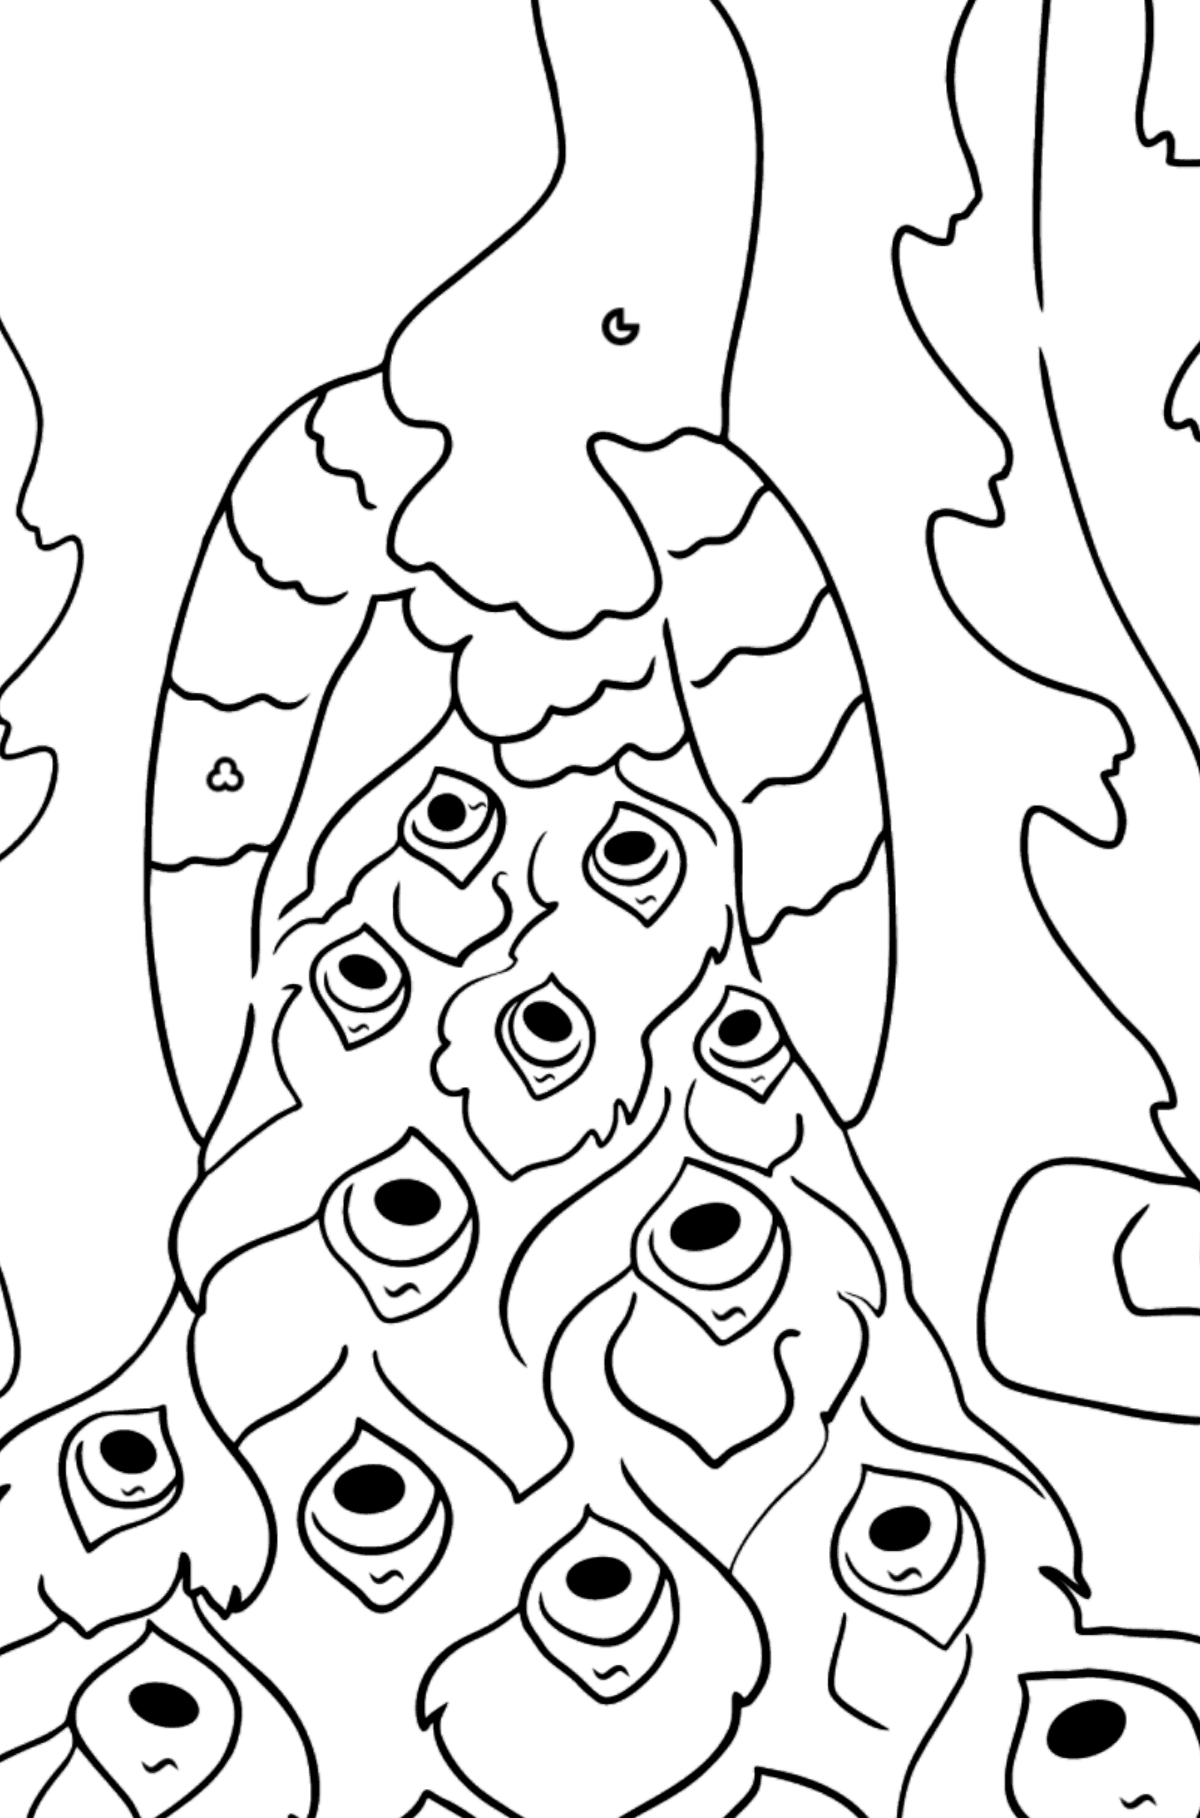 A Pompous and Haughty Peacock Coloring Page - Coloring by Symbols and Geometric Shapes for Kids